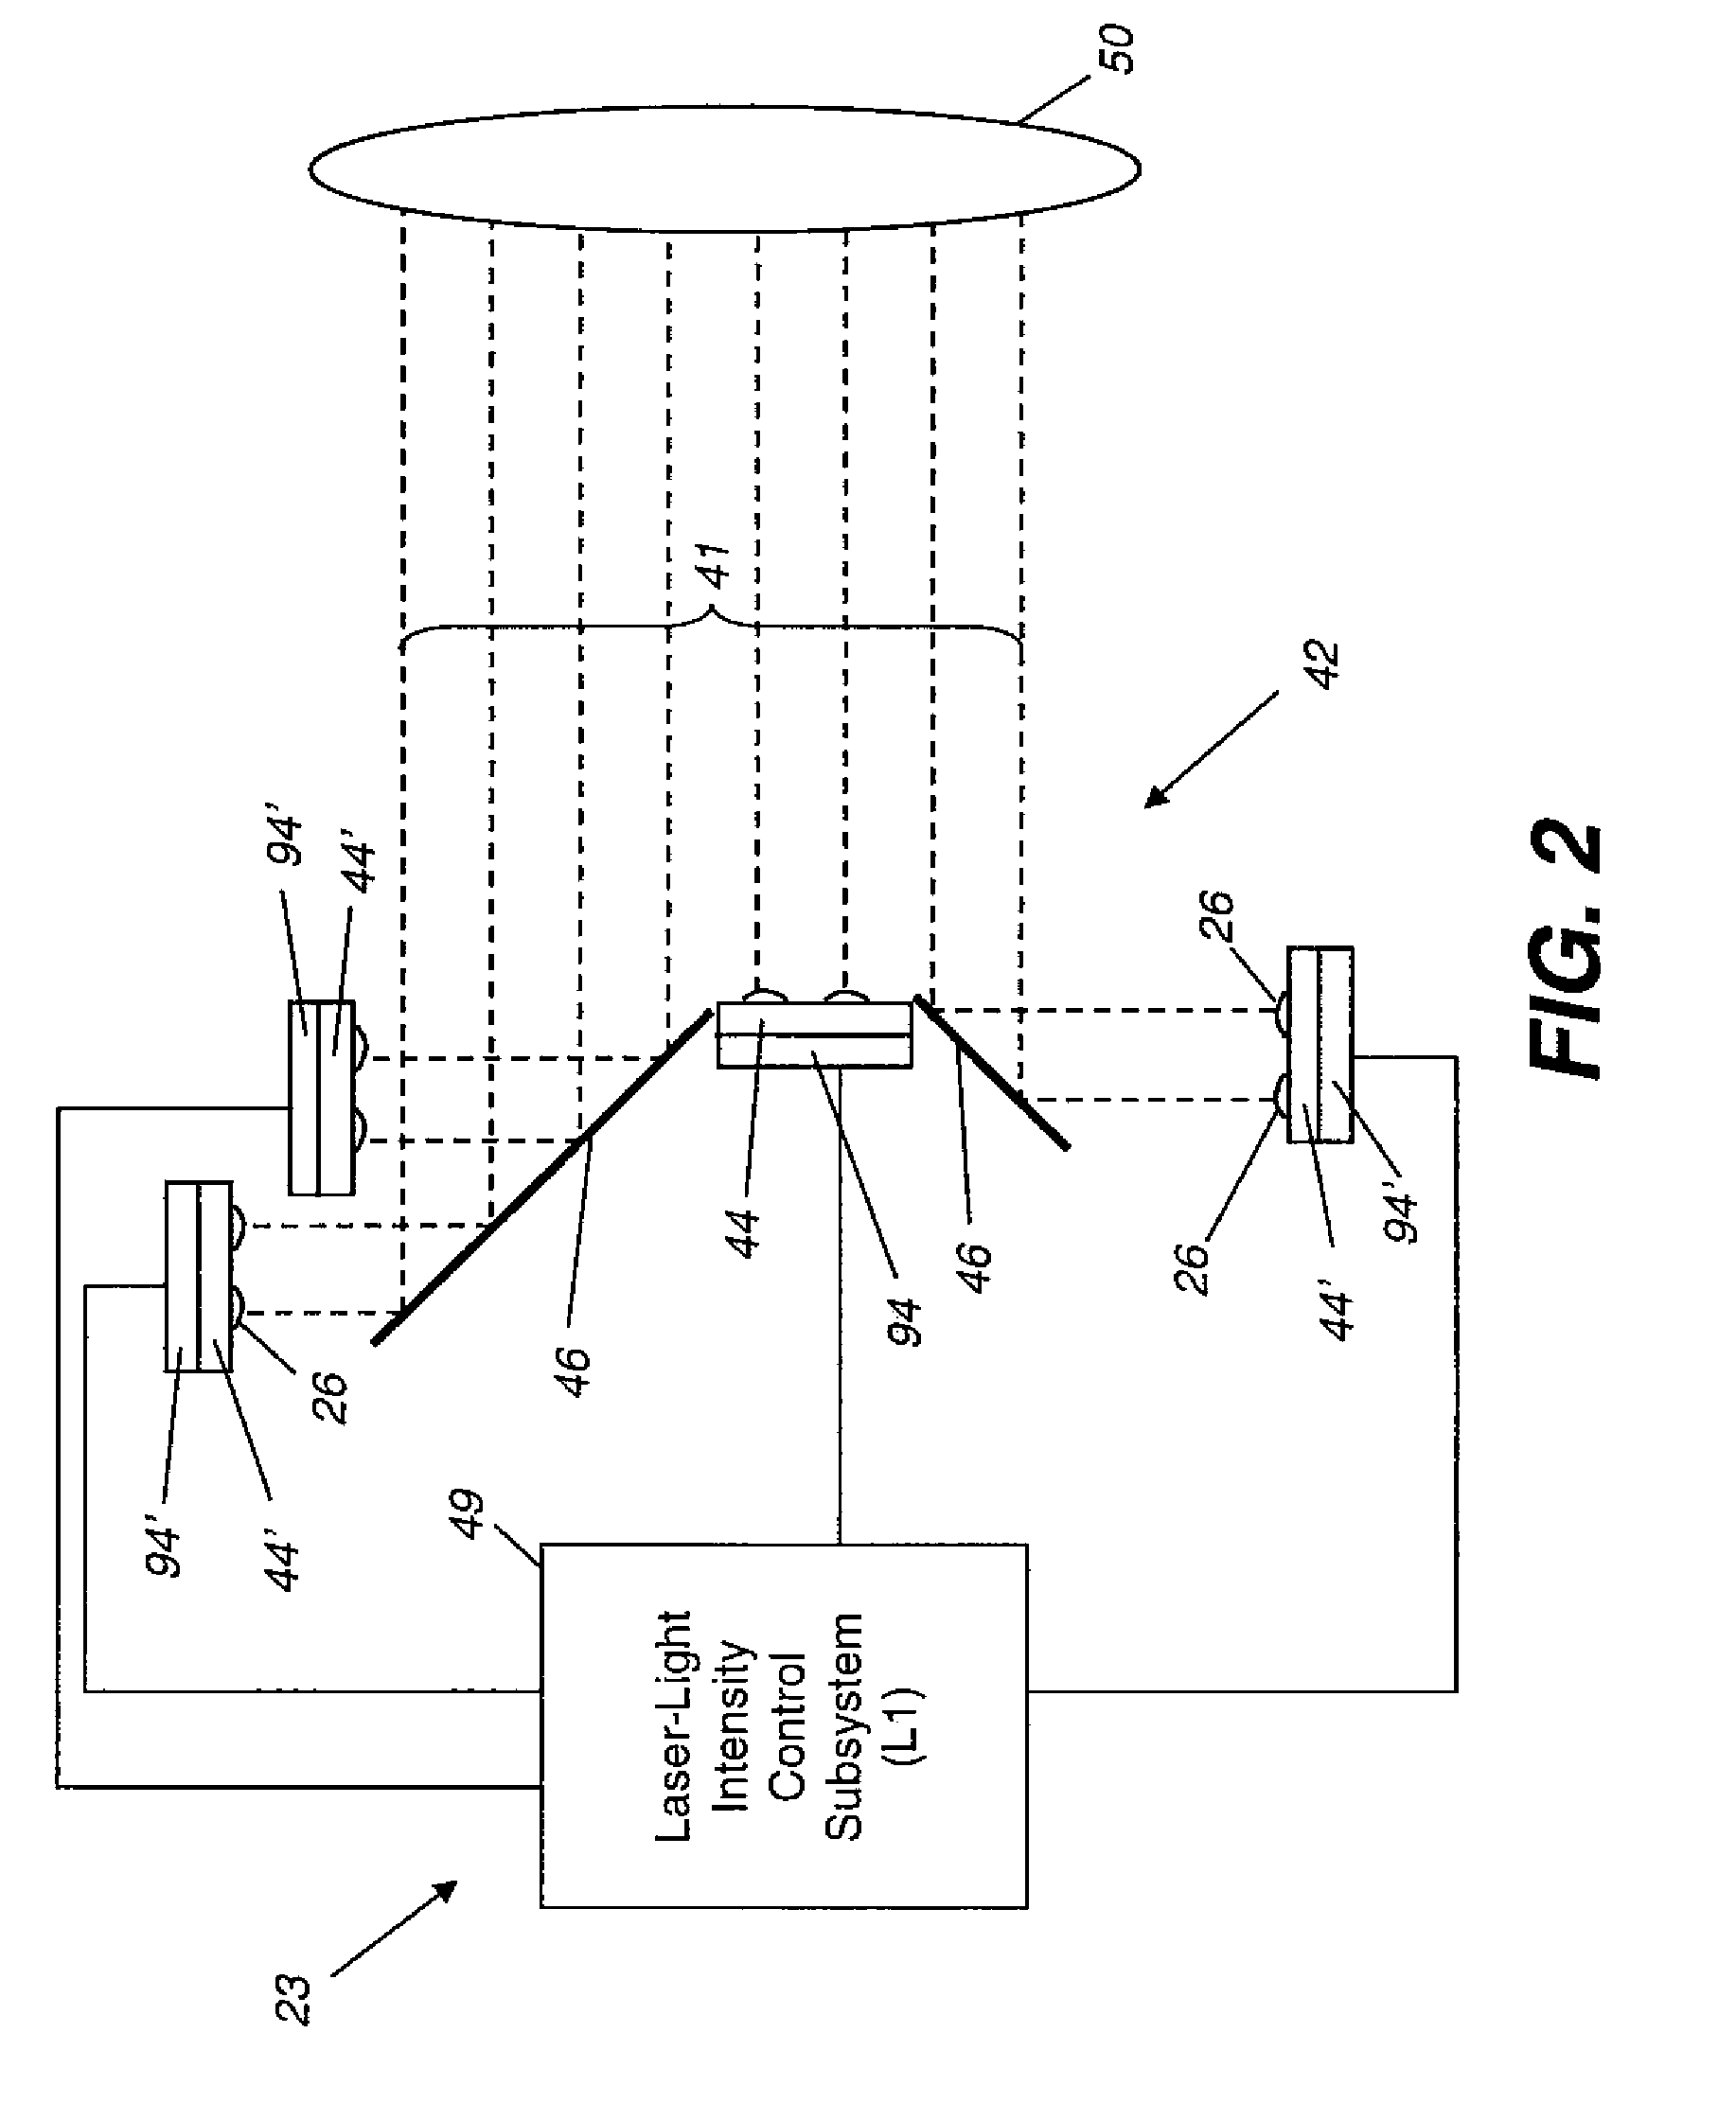 Hierarchical light intensity control in light projector